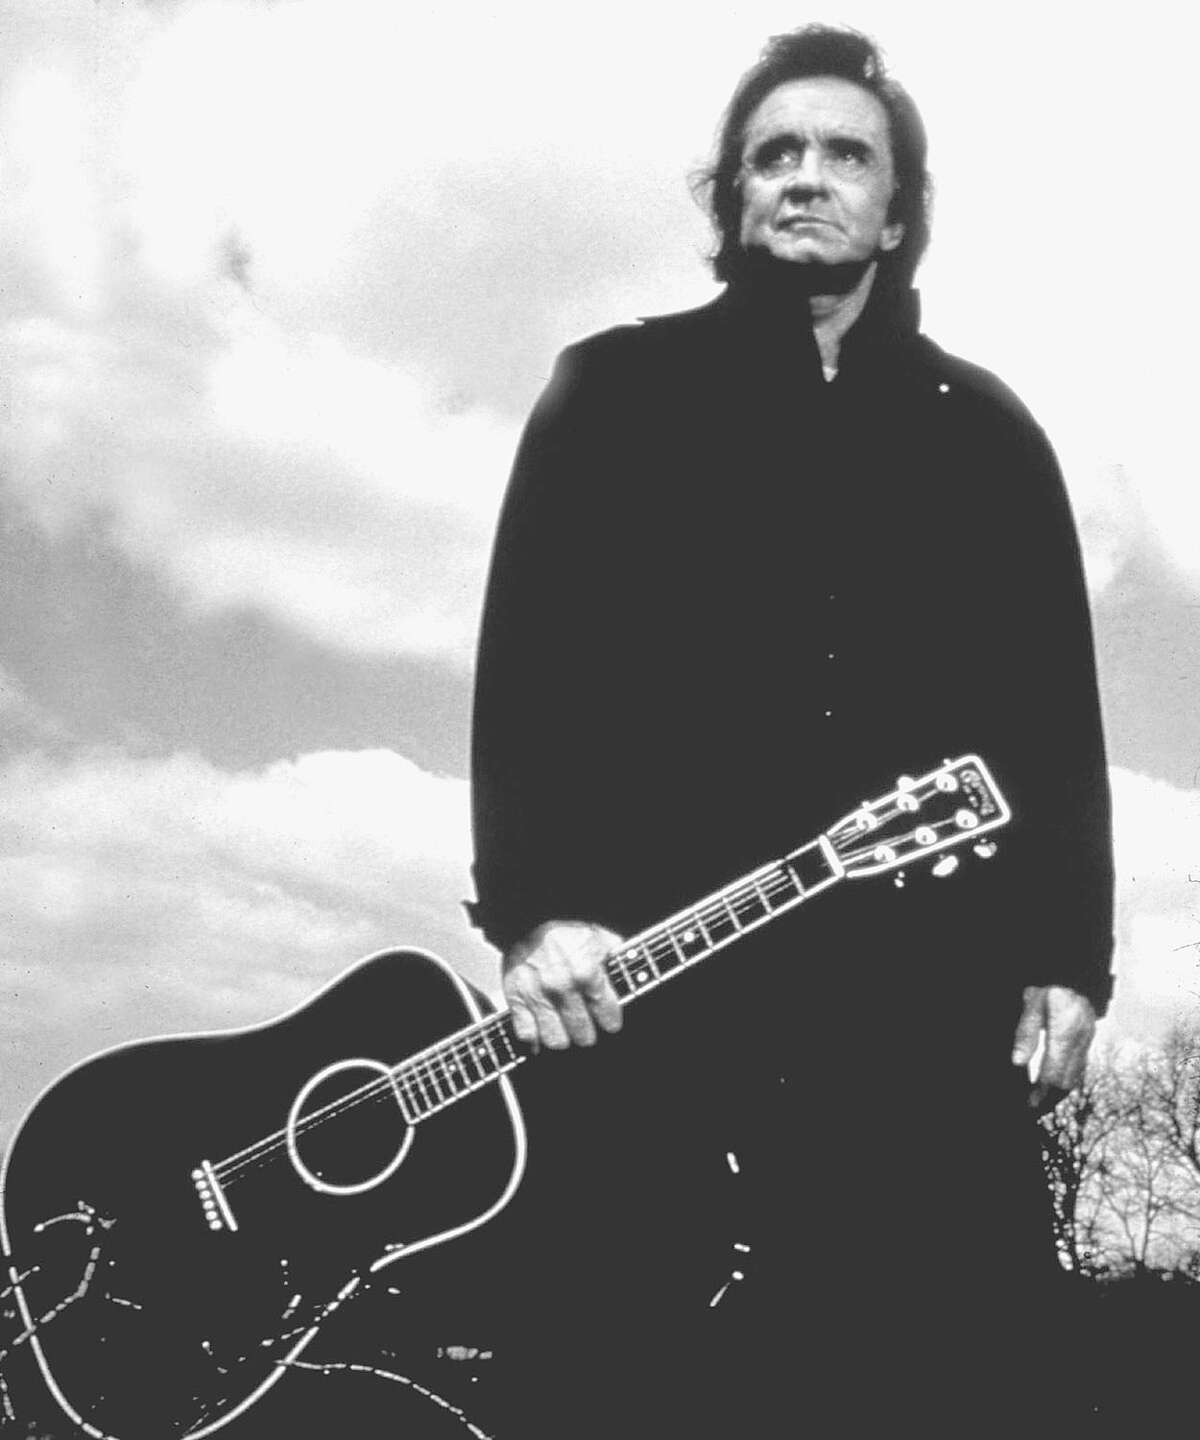 Robert Hilburn book touches on Johnny Cash's time in S.A.